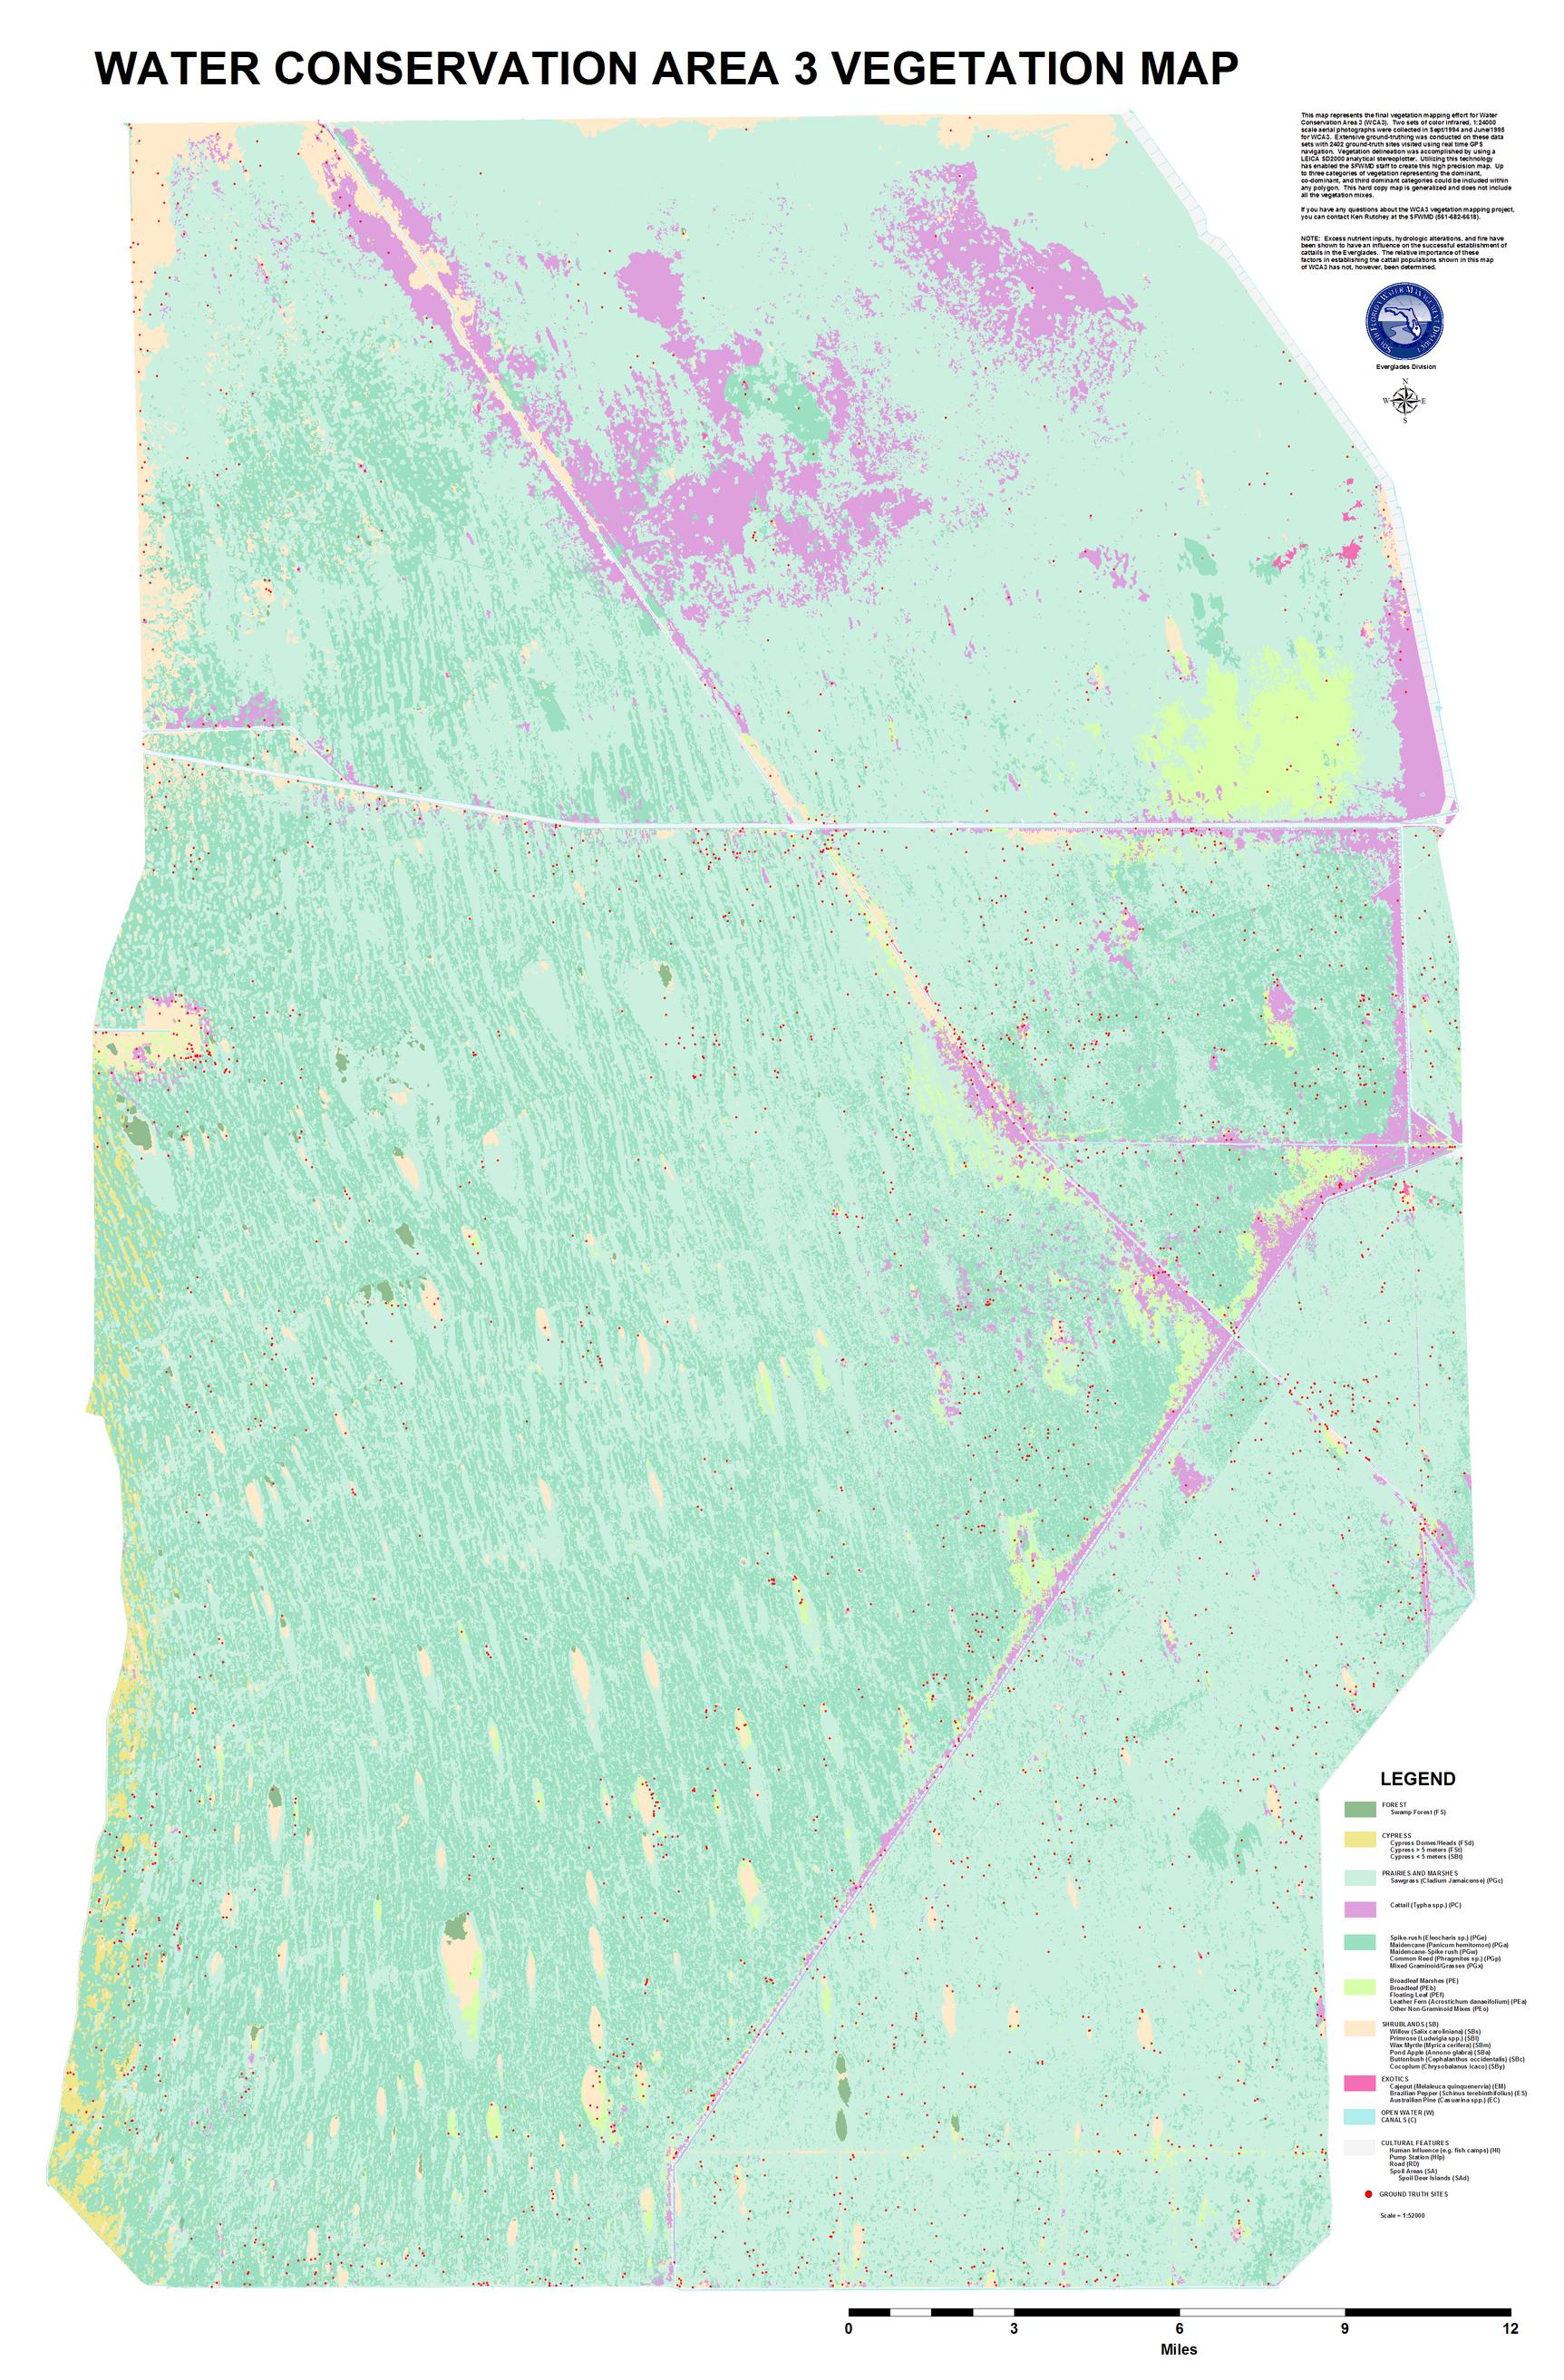 Vegetation map of Water Conservation Area 3, Everglades, South Florida (1/2 scale)